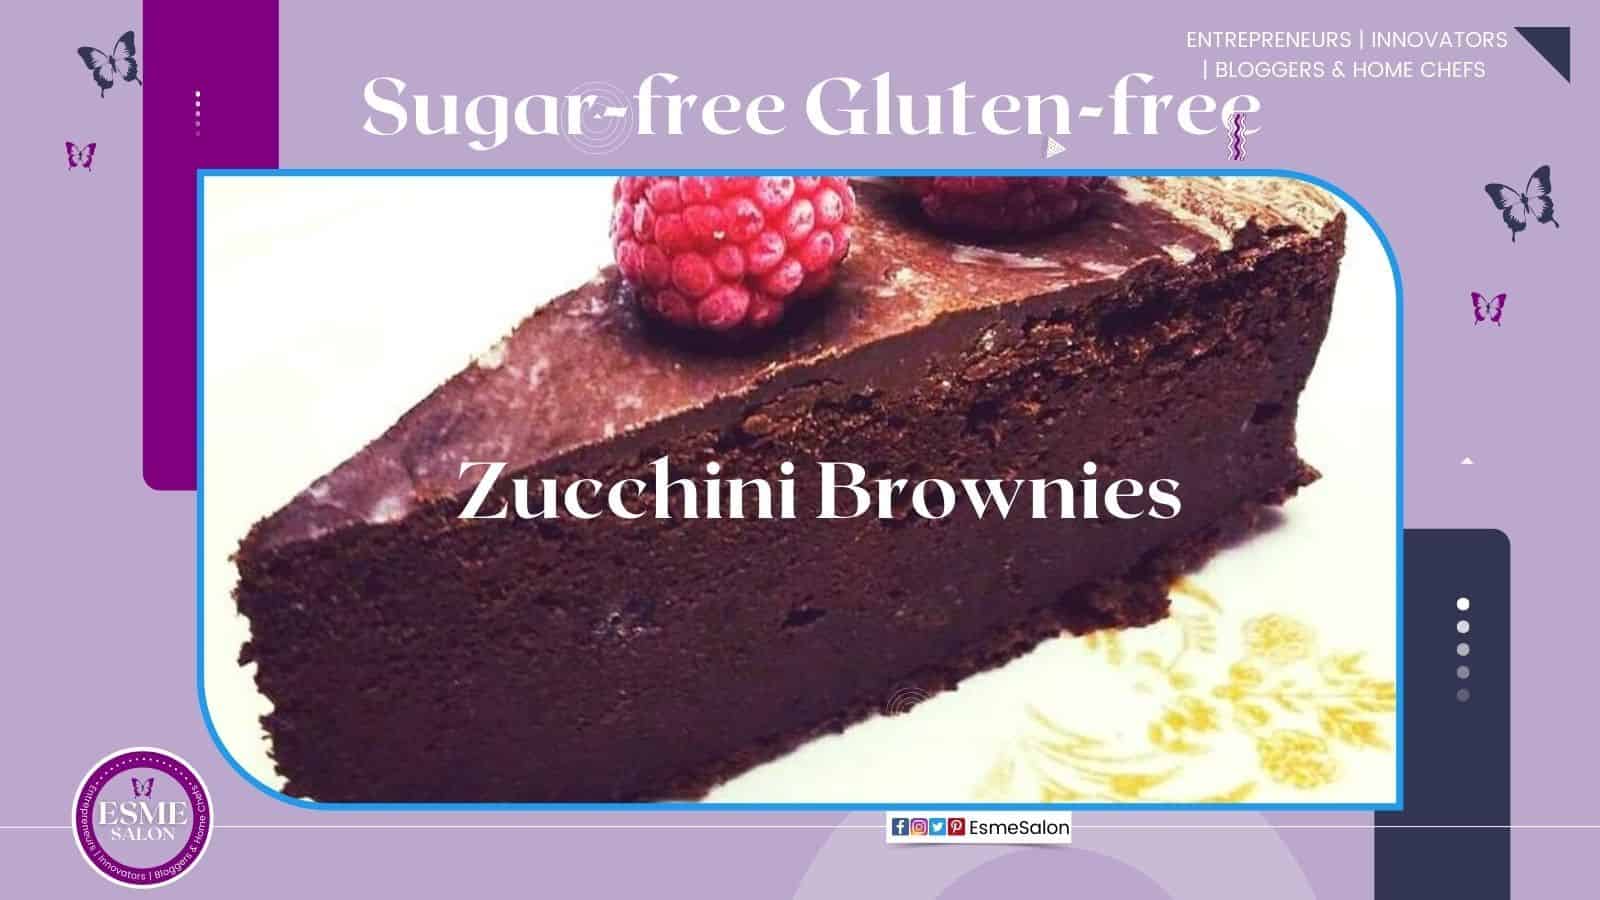 Zucchini brownies with raspberries on top